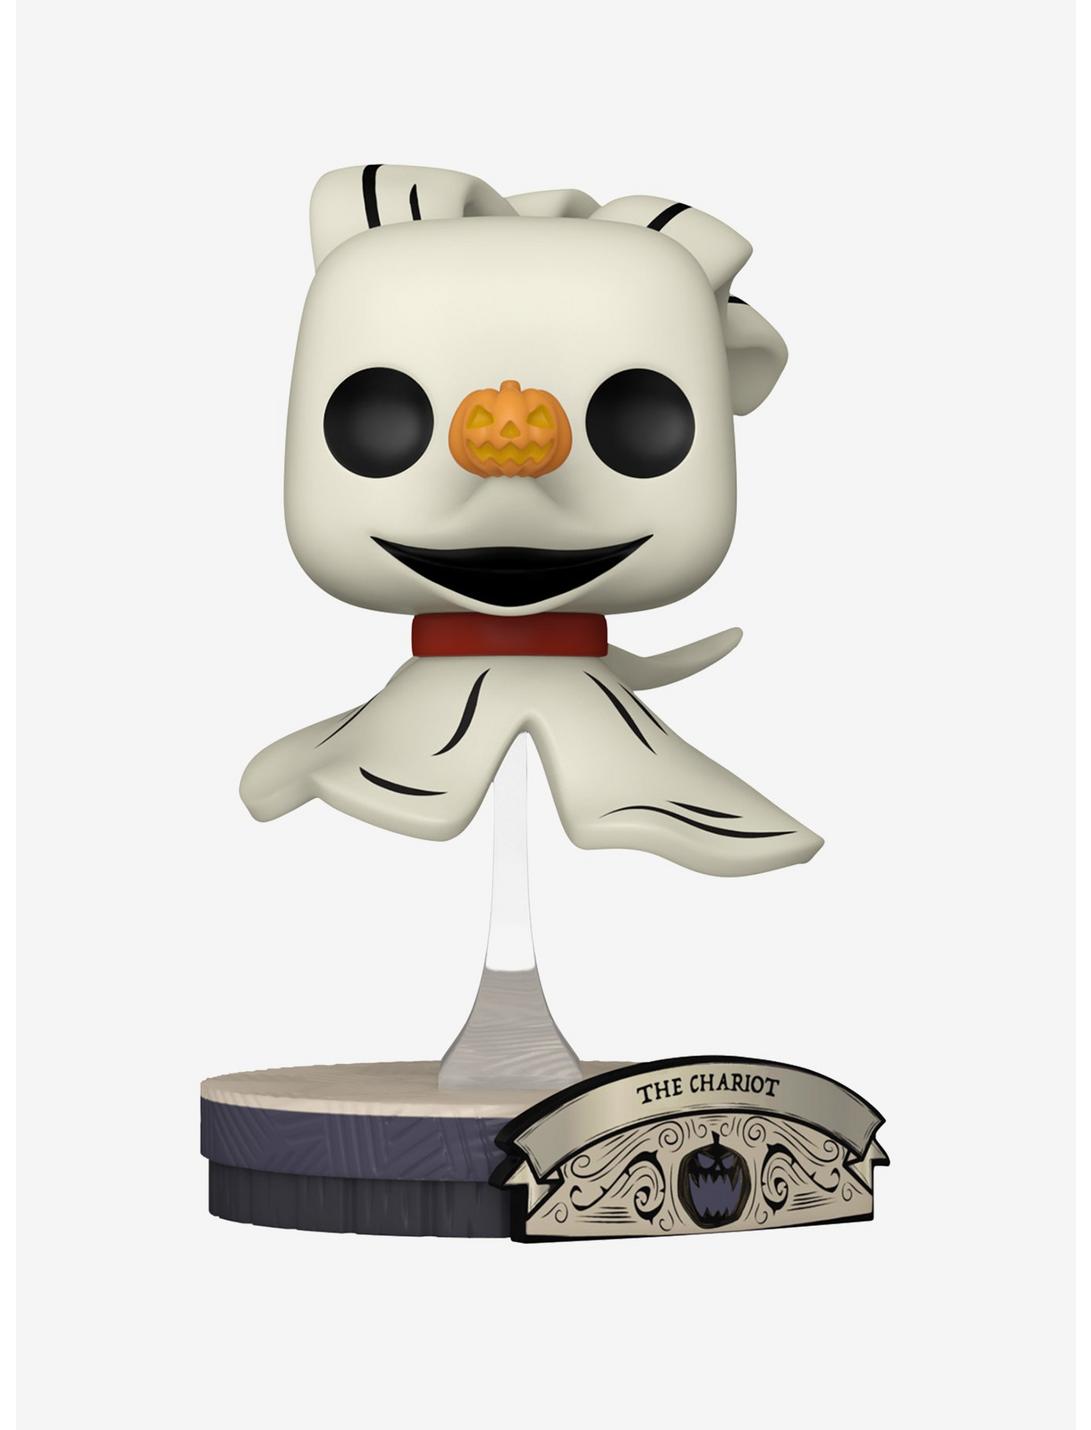 Funko The Nightmare Before Christmas Pop! Zero As The Chariot Vinyl Figure Hot Topic Exclusive, , hi-res